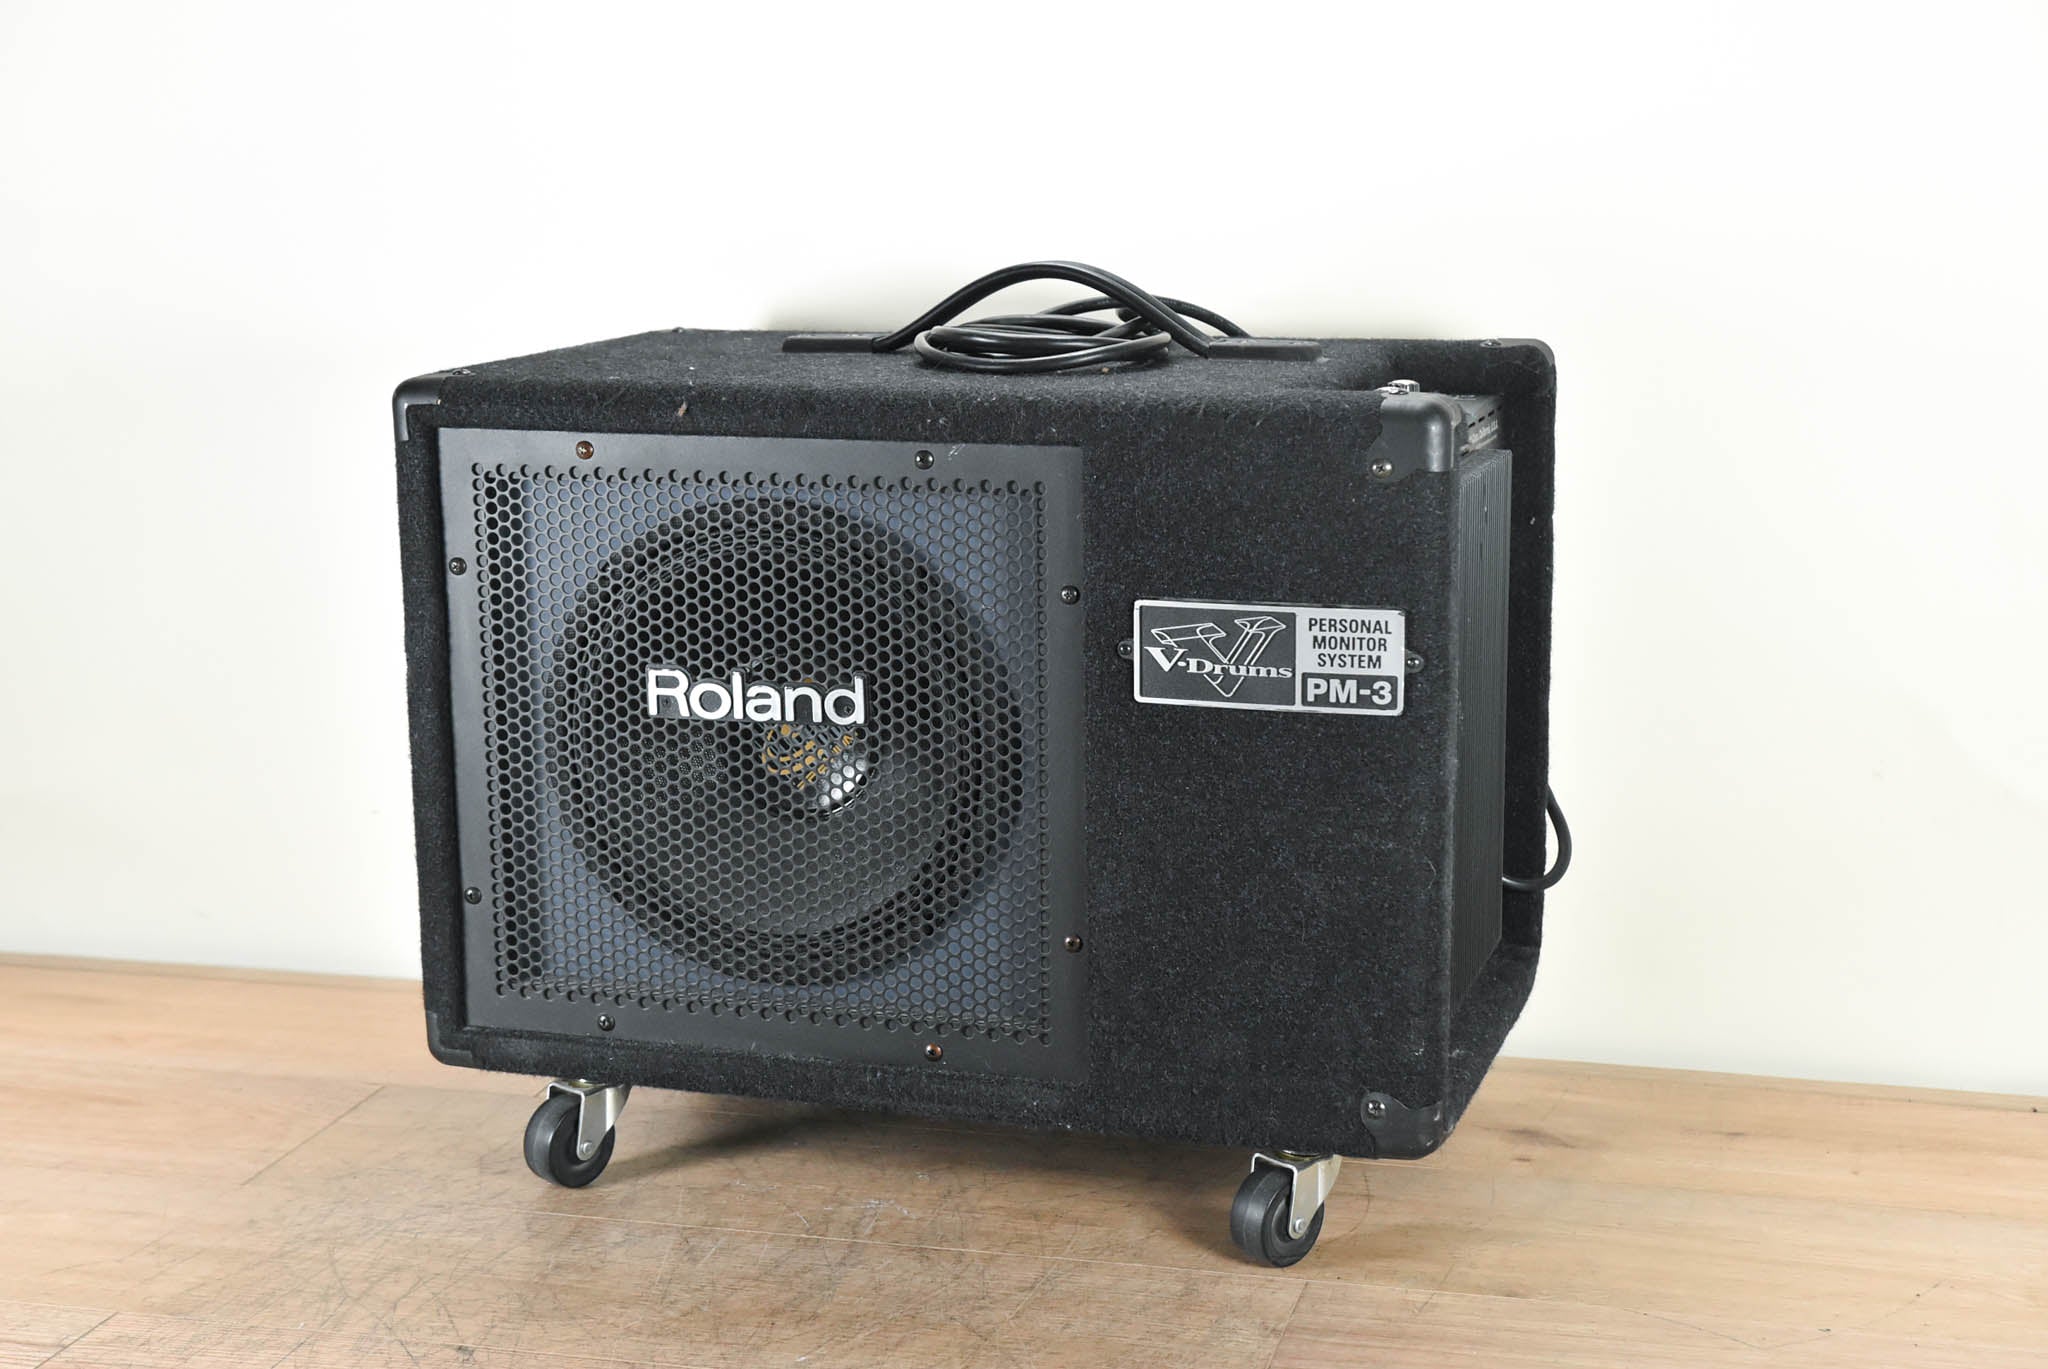 Roland PM-3 Personal Monitor System (Woofer Unit Only)